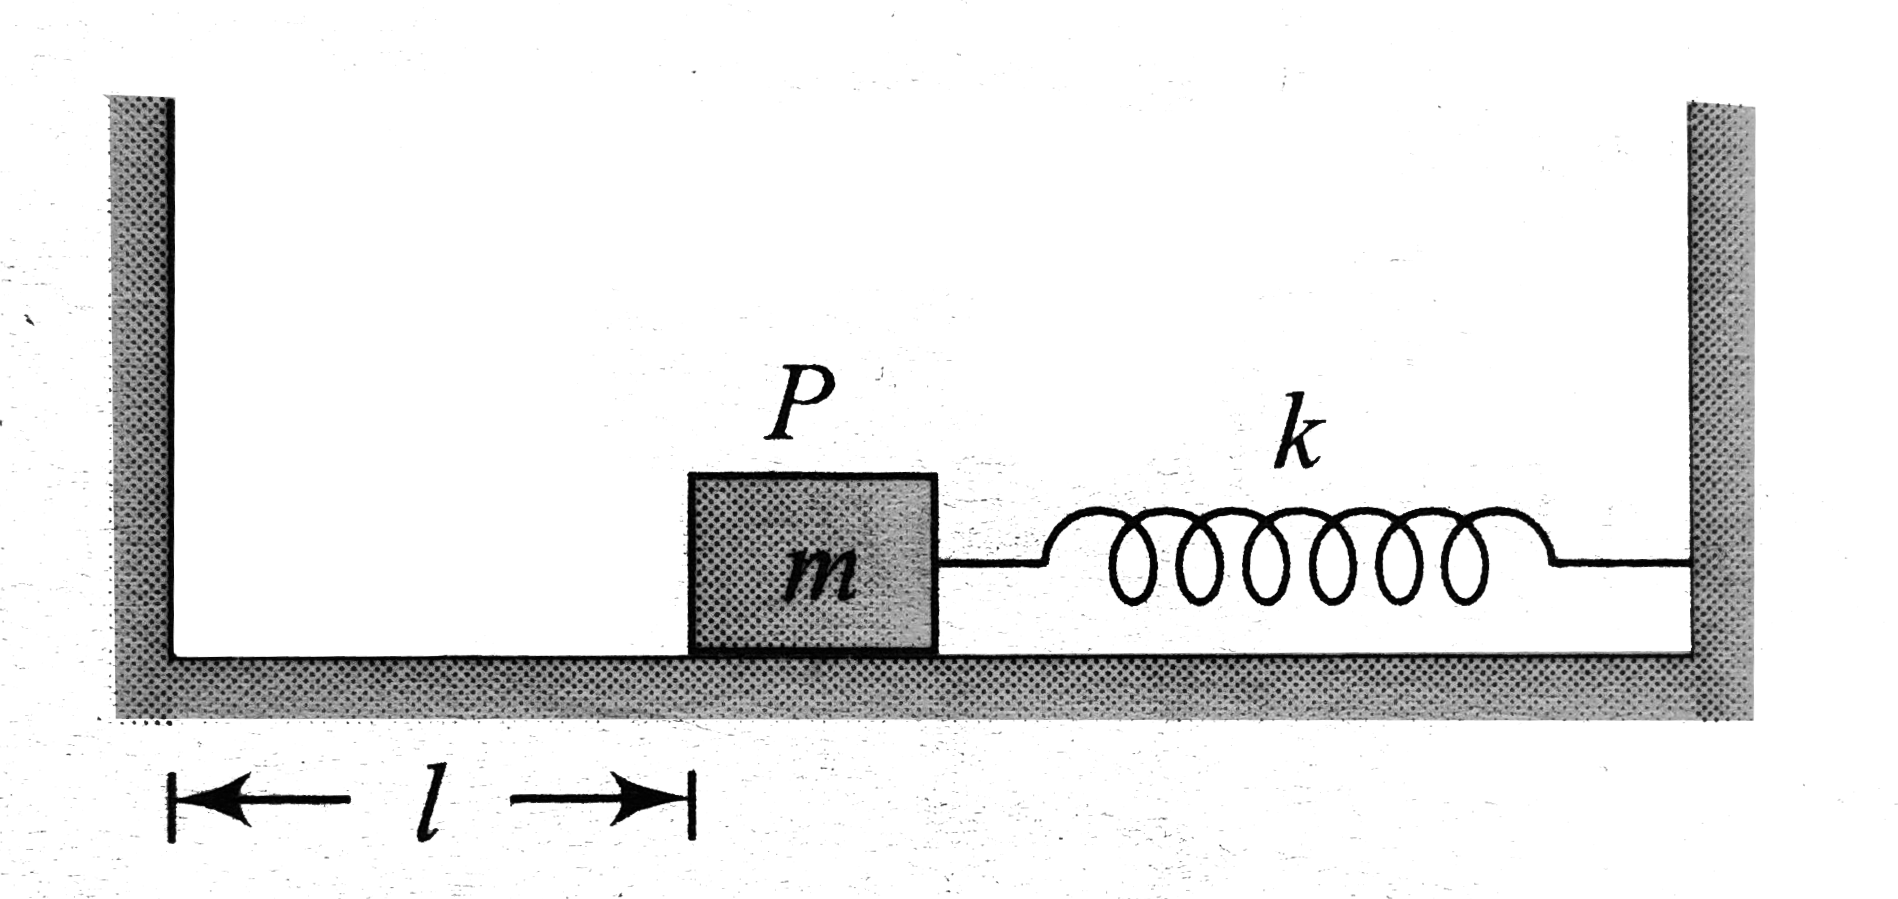 Figure shows a block P of mass m resting on a smooth floor at a distance l from a rigid wall. Block is pushed towards right by a distance 3l/2 and released. When block passes from its mean  position another block of mass m(1) is dropped over it, find the minimum value of m(1) so that the combined block just collides with the left wall.